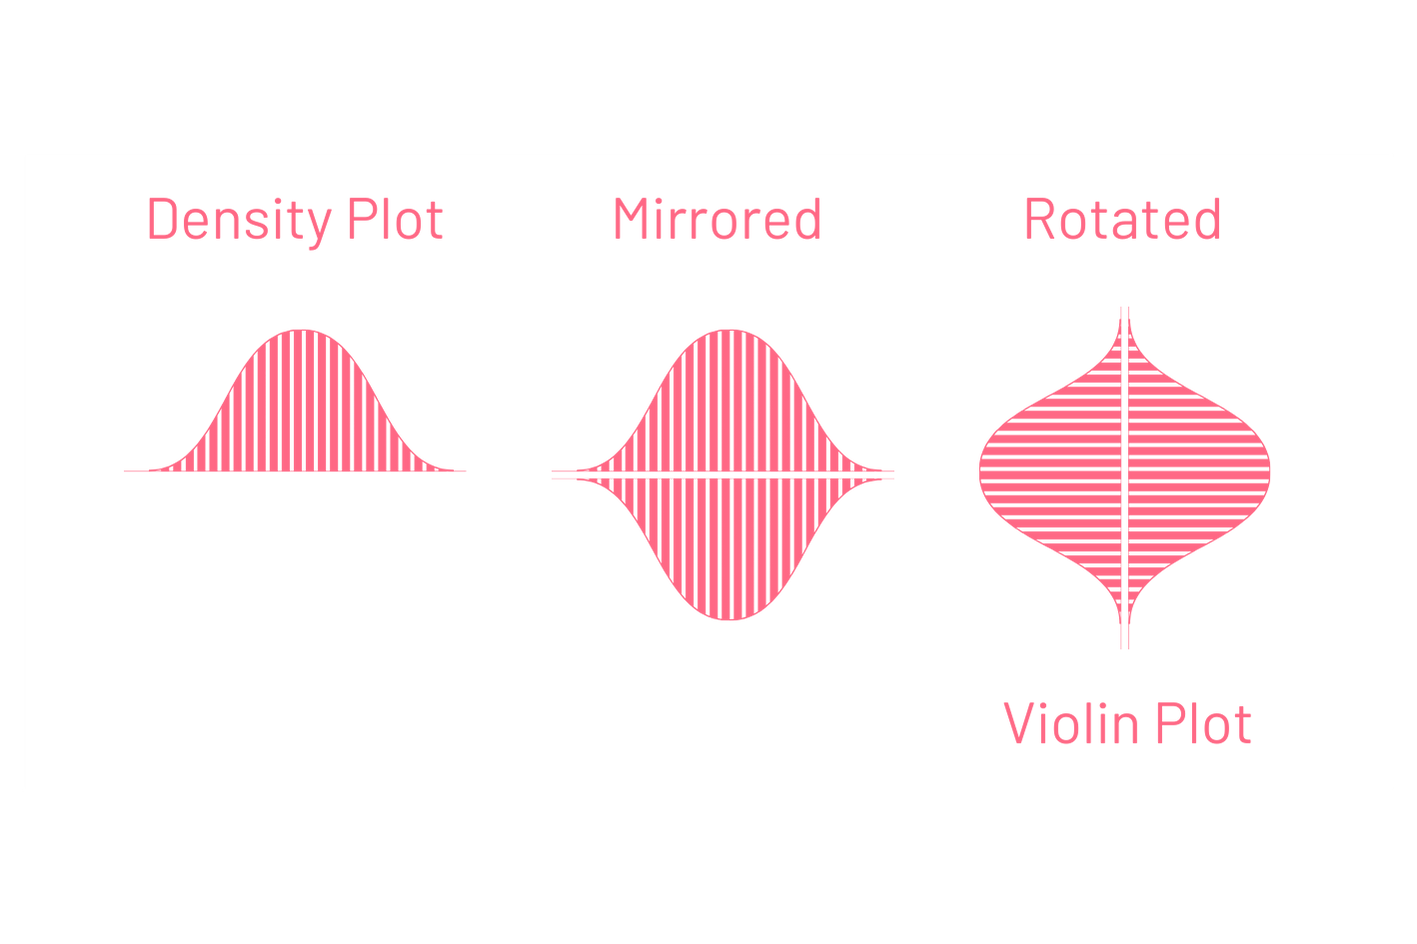 Visual description of what a violin plot is. First a density curve is shown. Second, a mirrored version of it is shown and lastly it is rotated by 90 degrees.